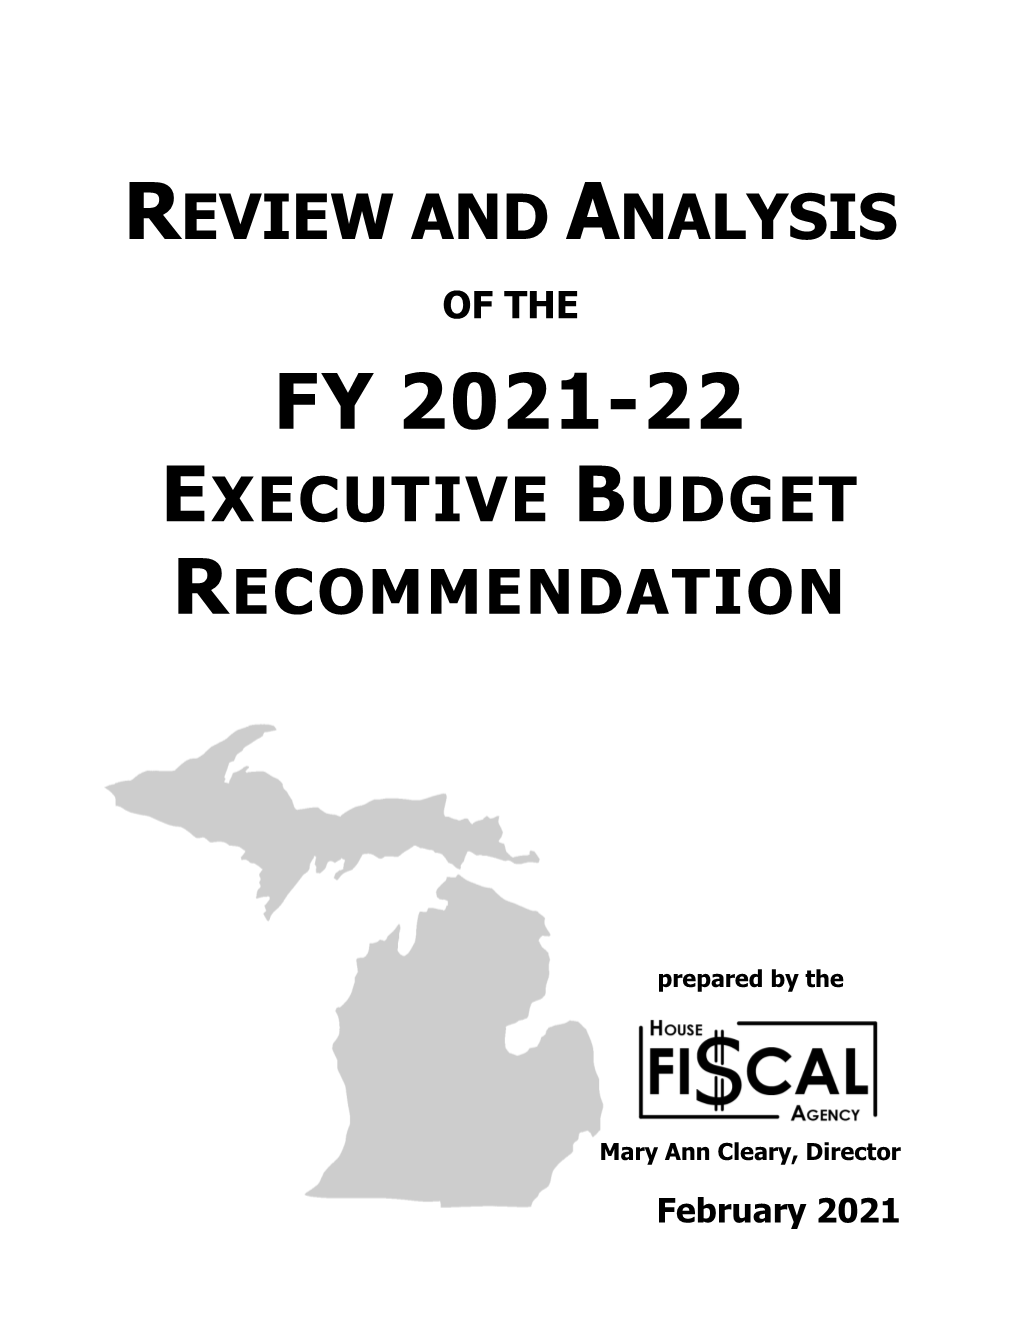 Review and Analysis of FY 2021-22 Executive Budget Recommendation